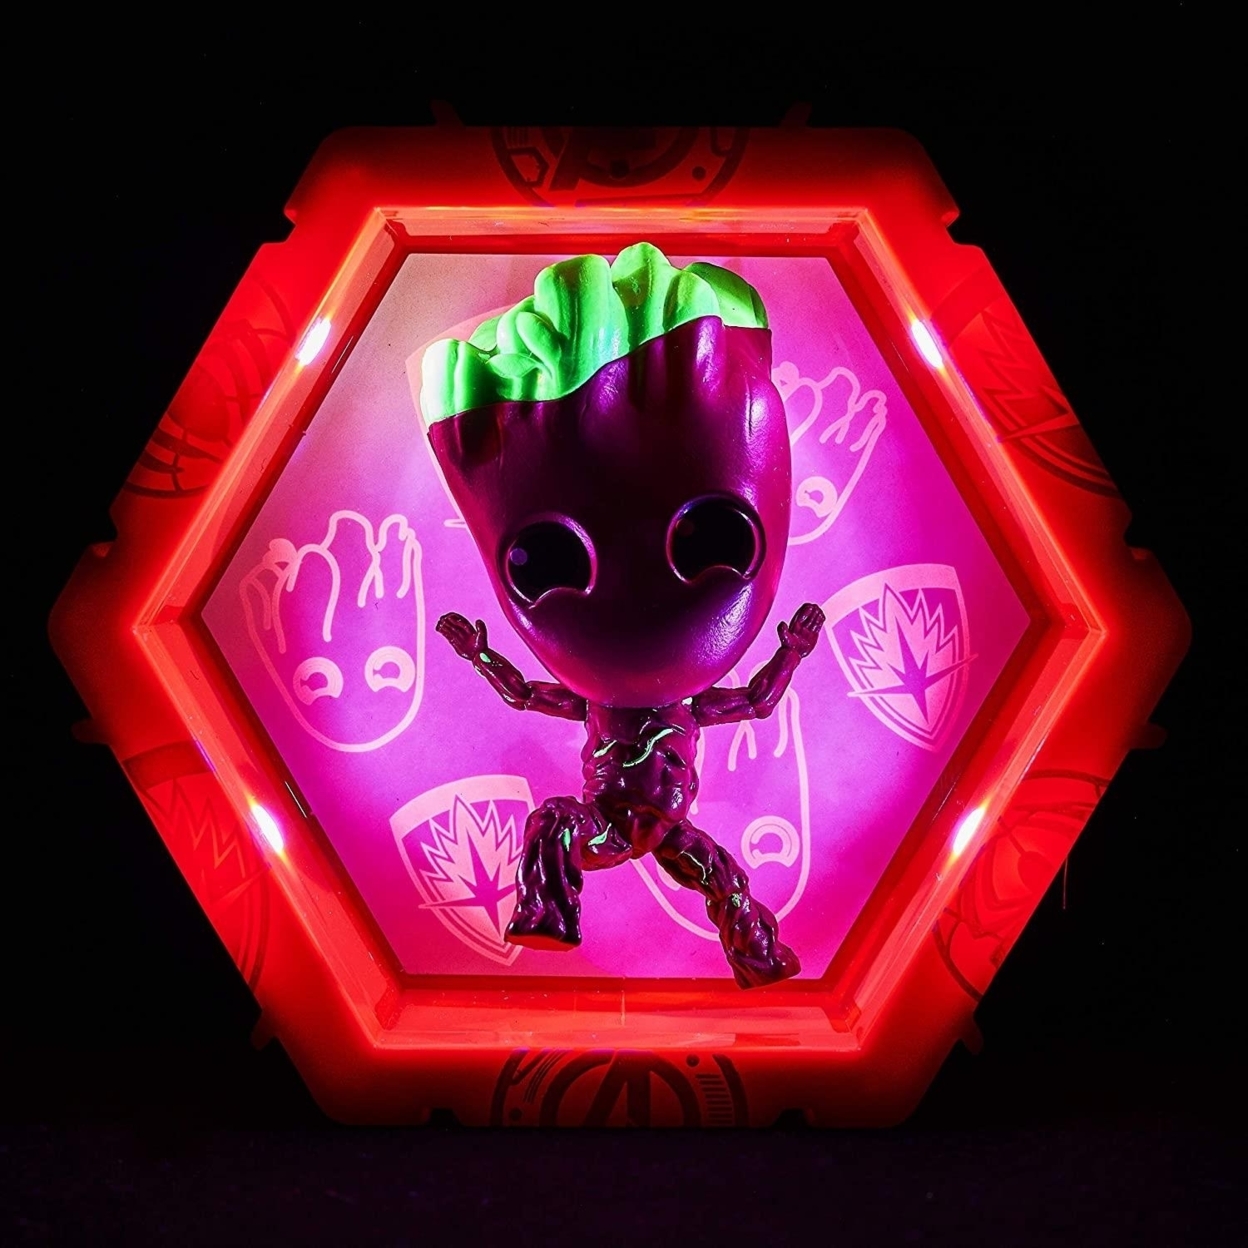 WOW Pods Marvel Avengers Groot Light-Up Figure Connectable Collectible WOW! Stuff